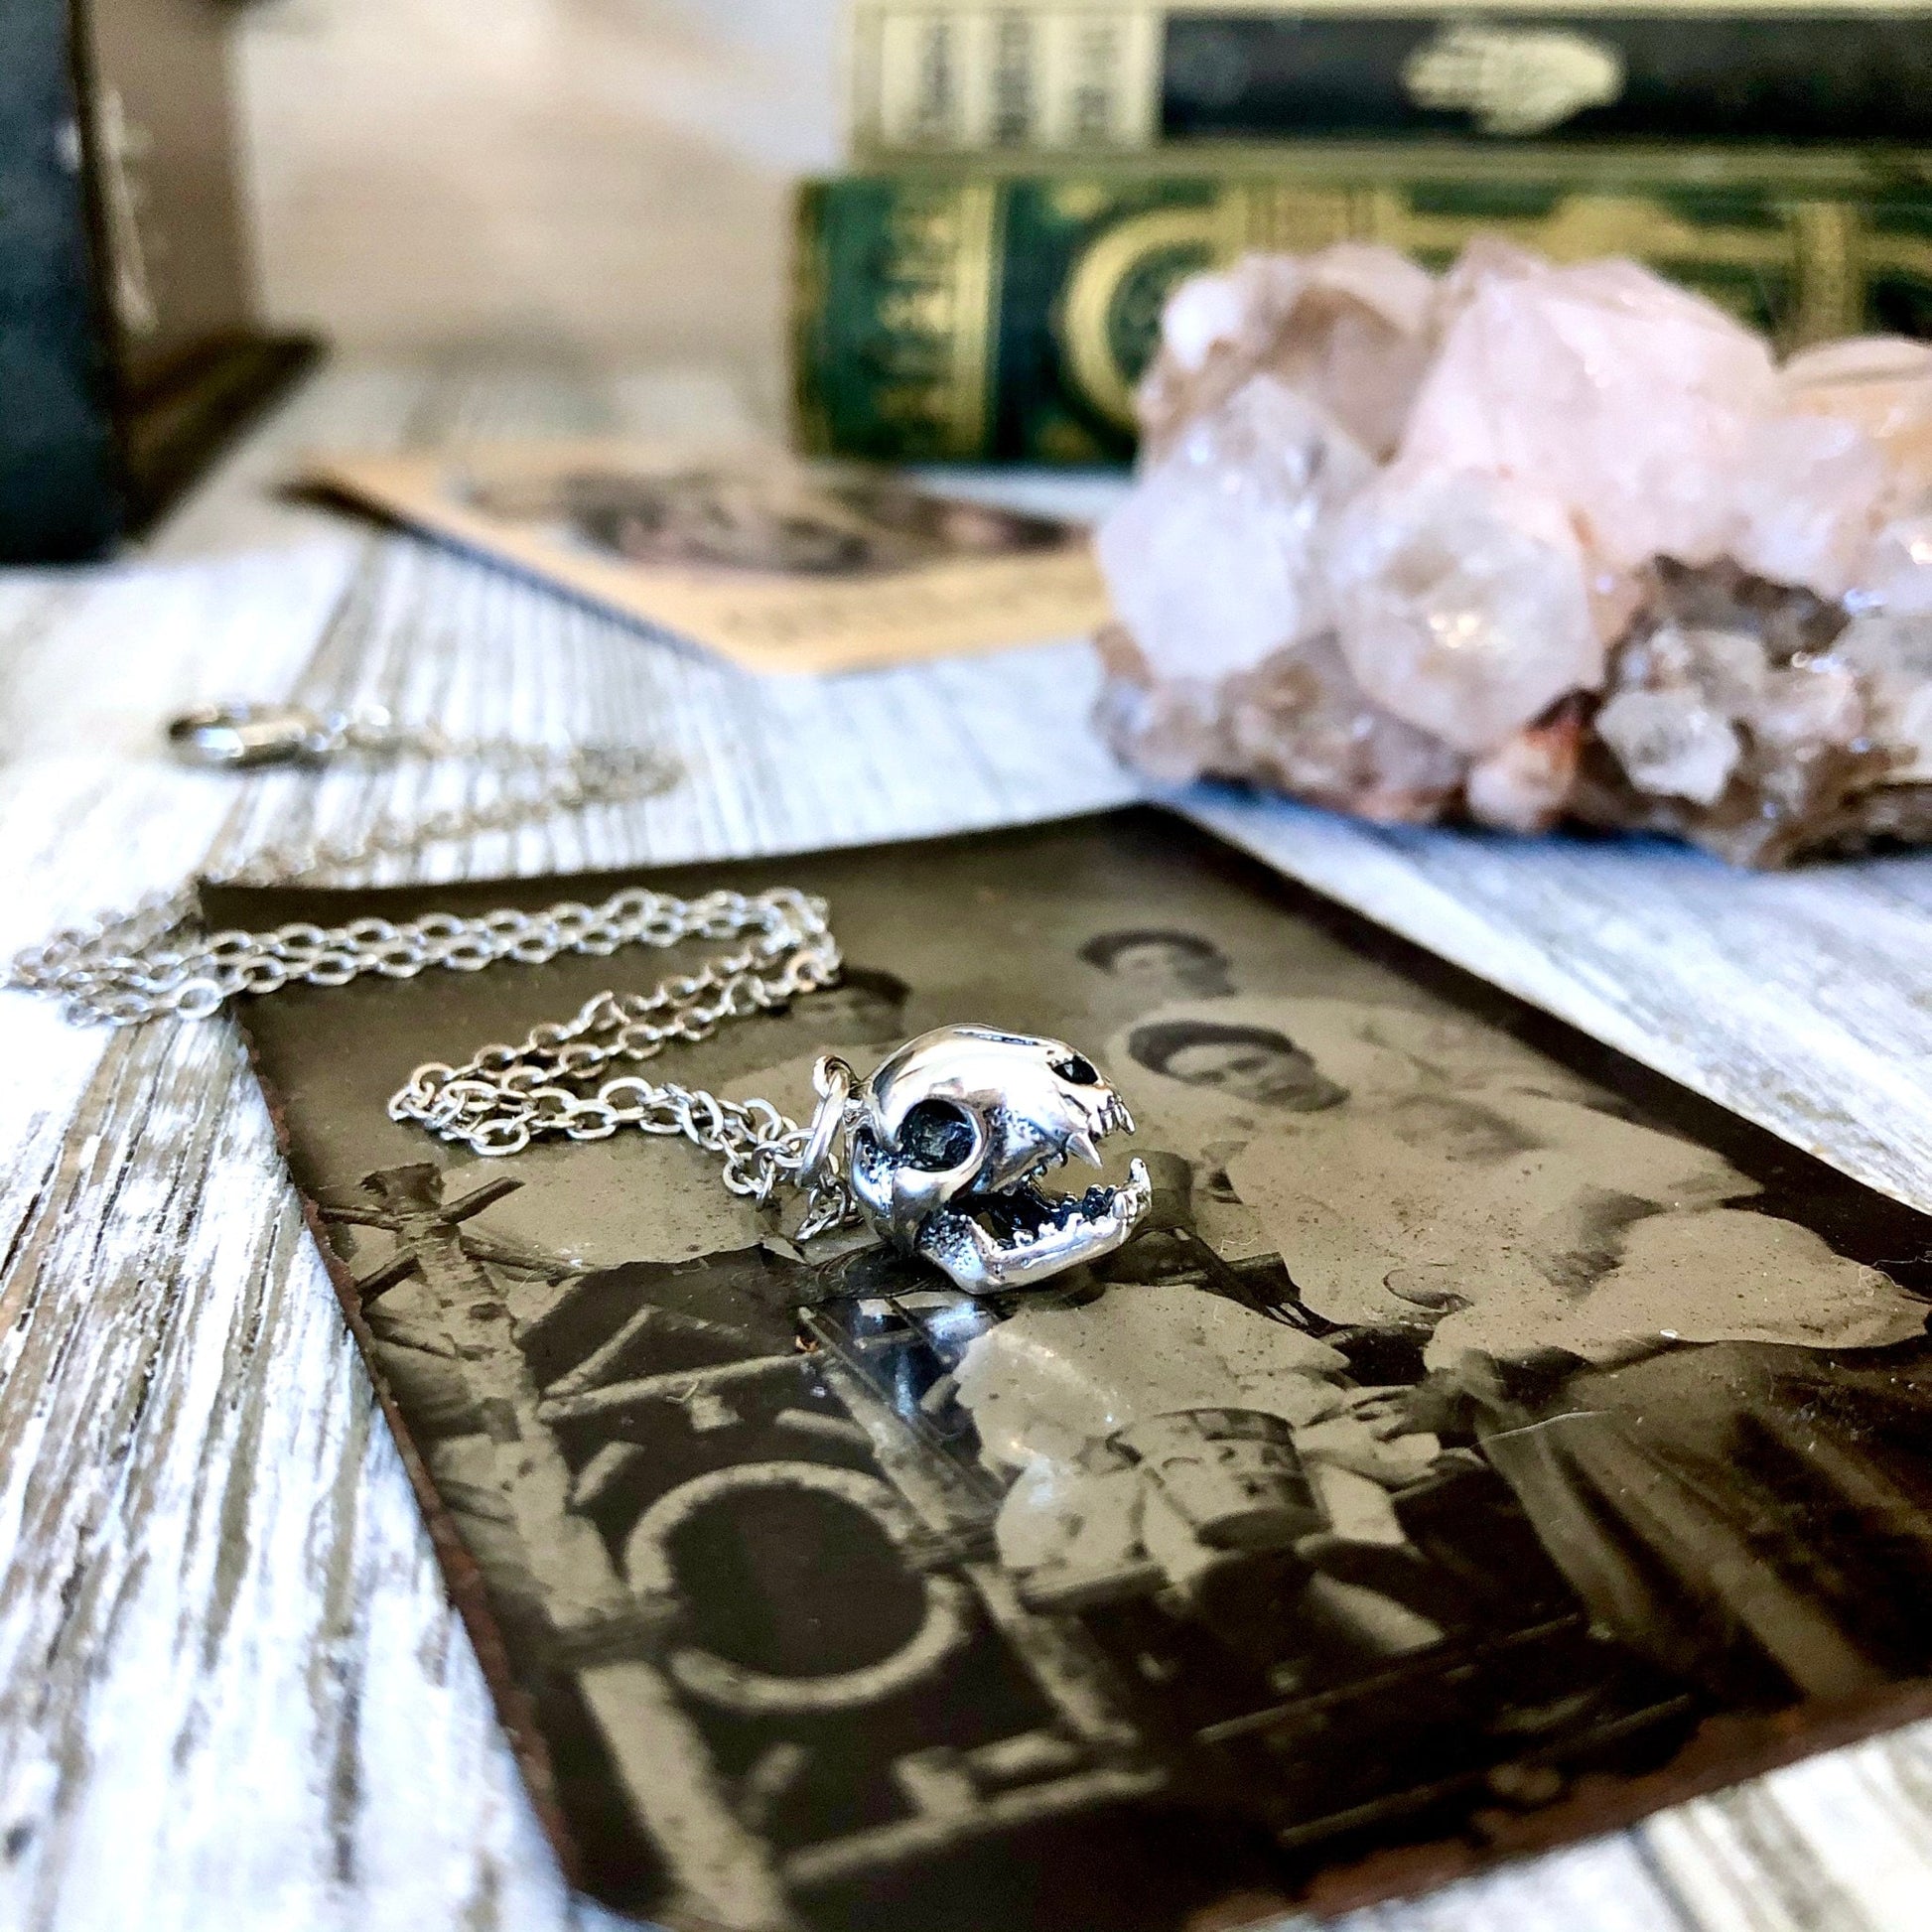 Tiny Talisman Collection - Sterling Silver Cat Skull Necklace Pendant 12x9mm / Curated Collection - Foxlark Crystal Jewelry